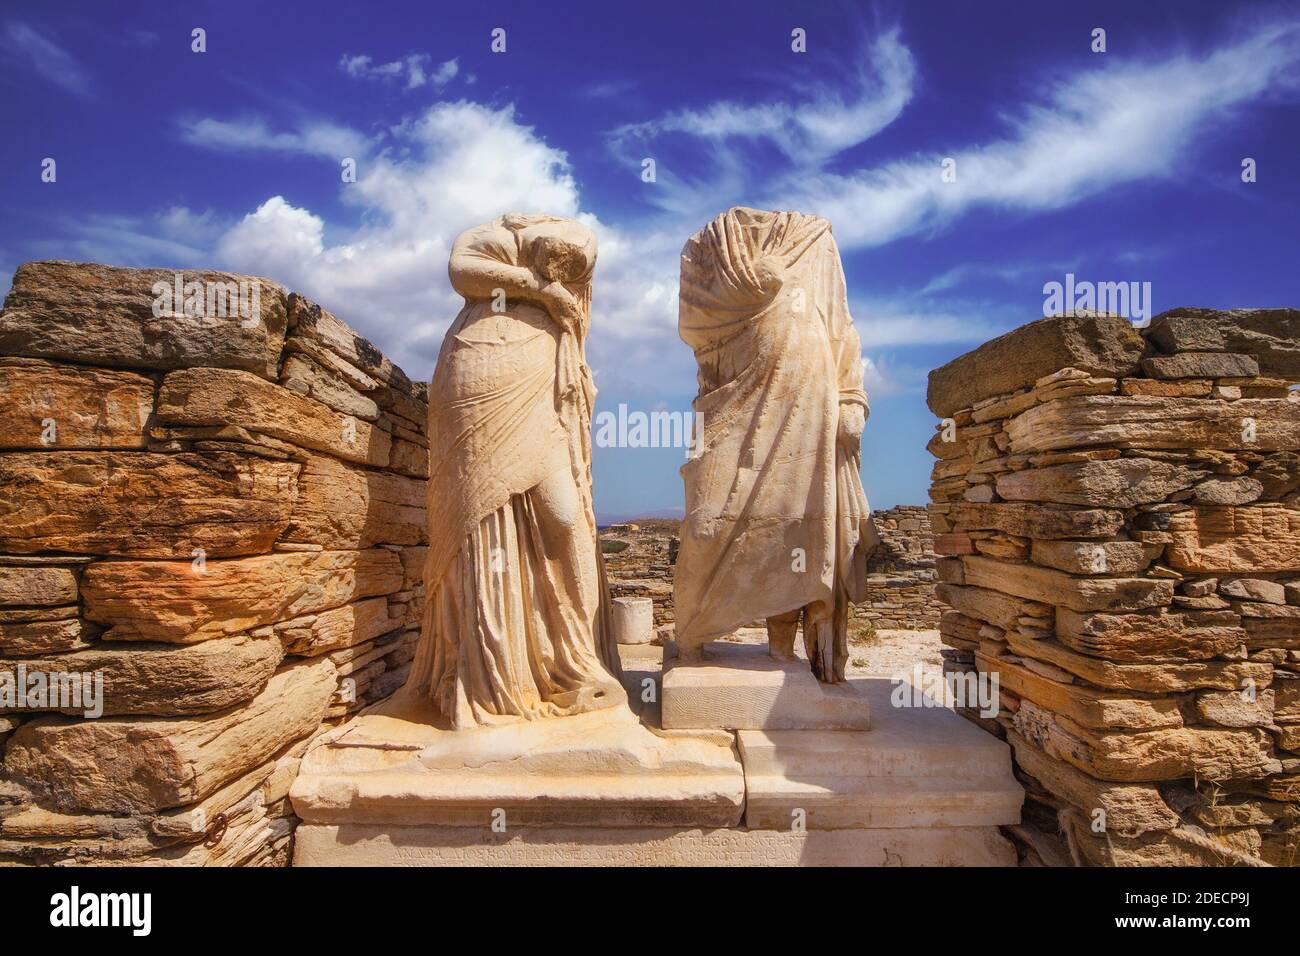 Sculptures of Cleopatra and Dioskourides in The House of Cleopatra, Delos island, Greece Stock Photo